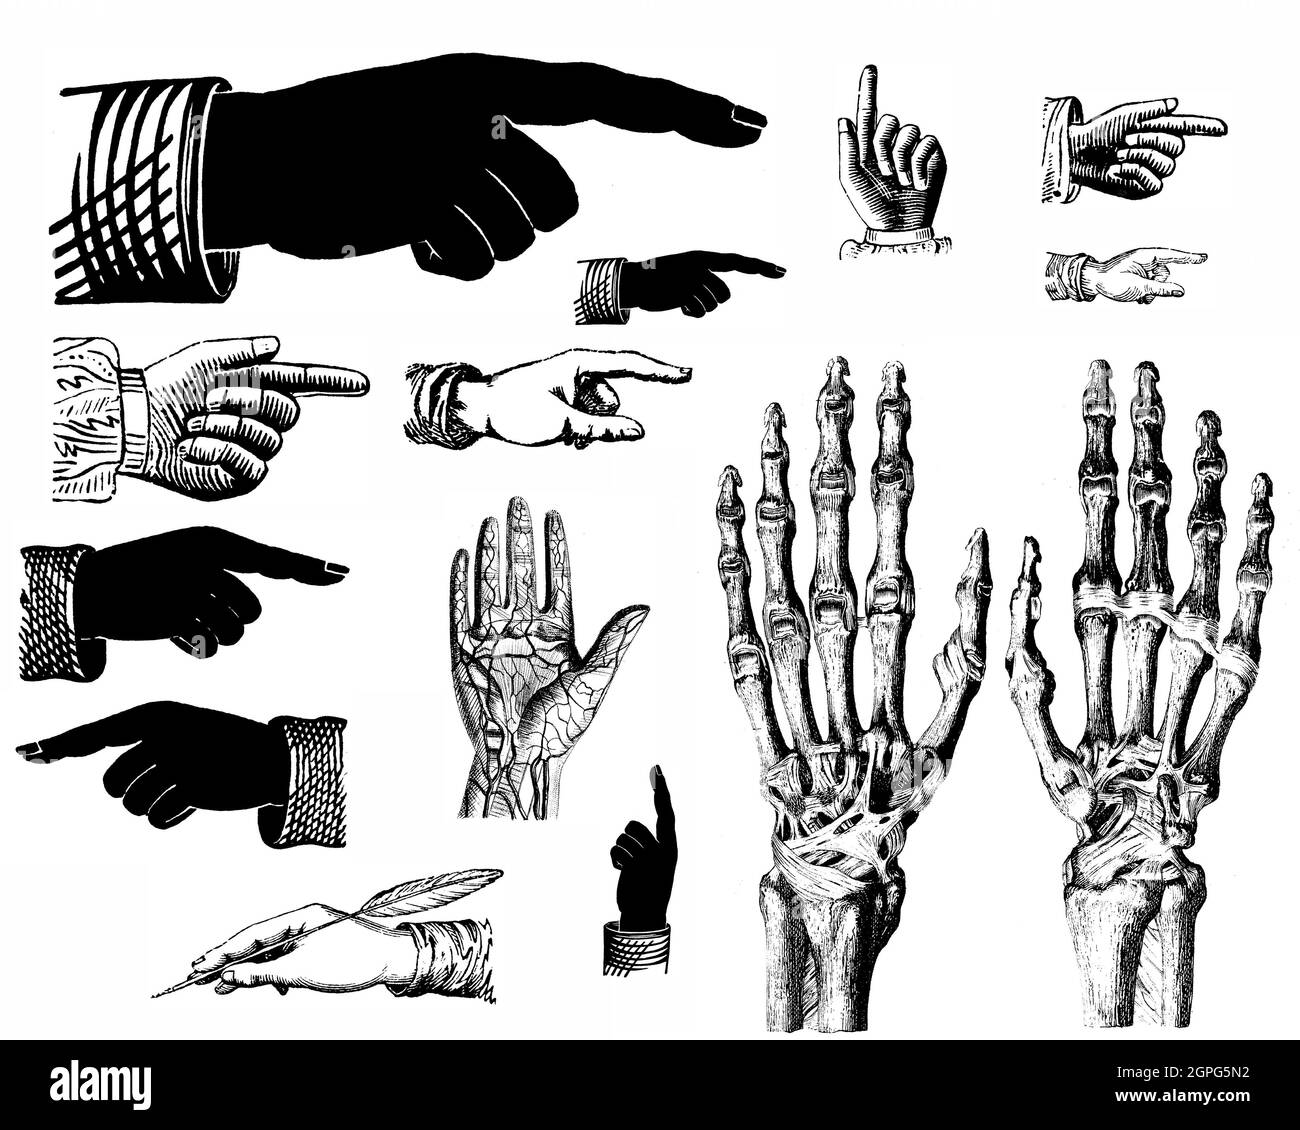 Skeleton hand Cut Out Stock Images & Pictures - Alamy